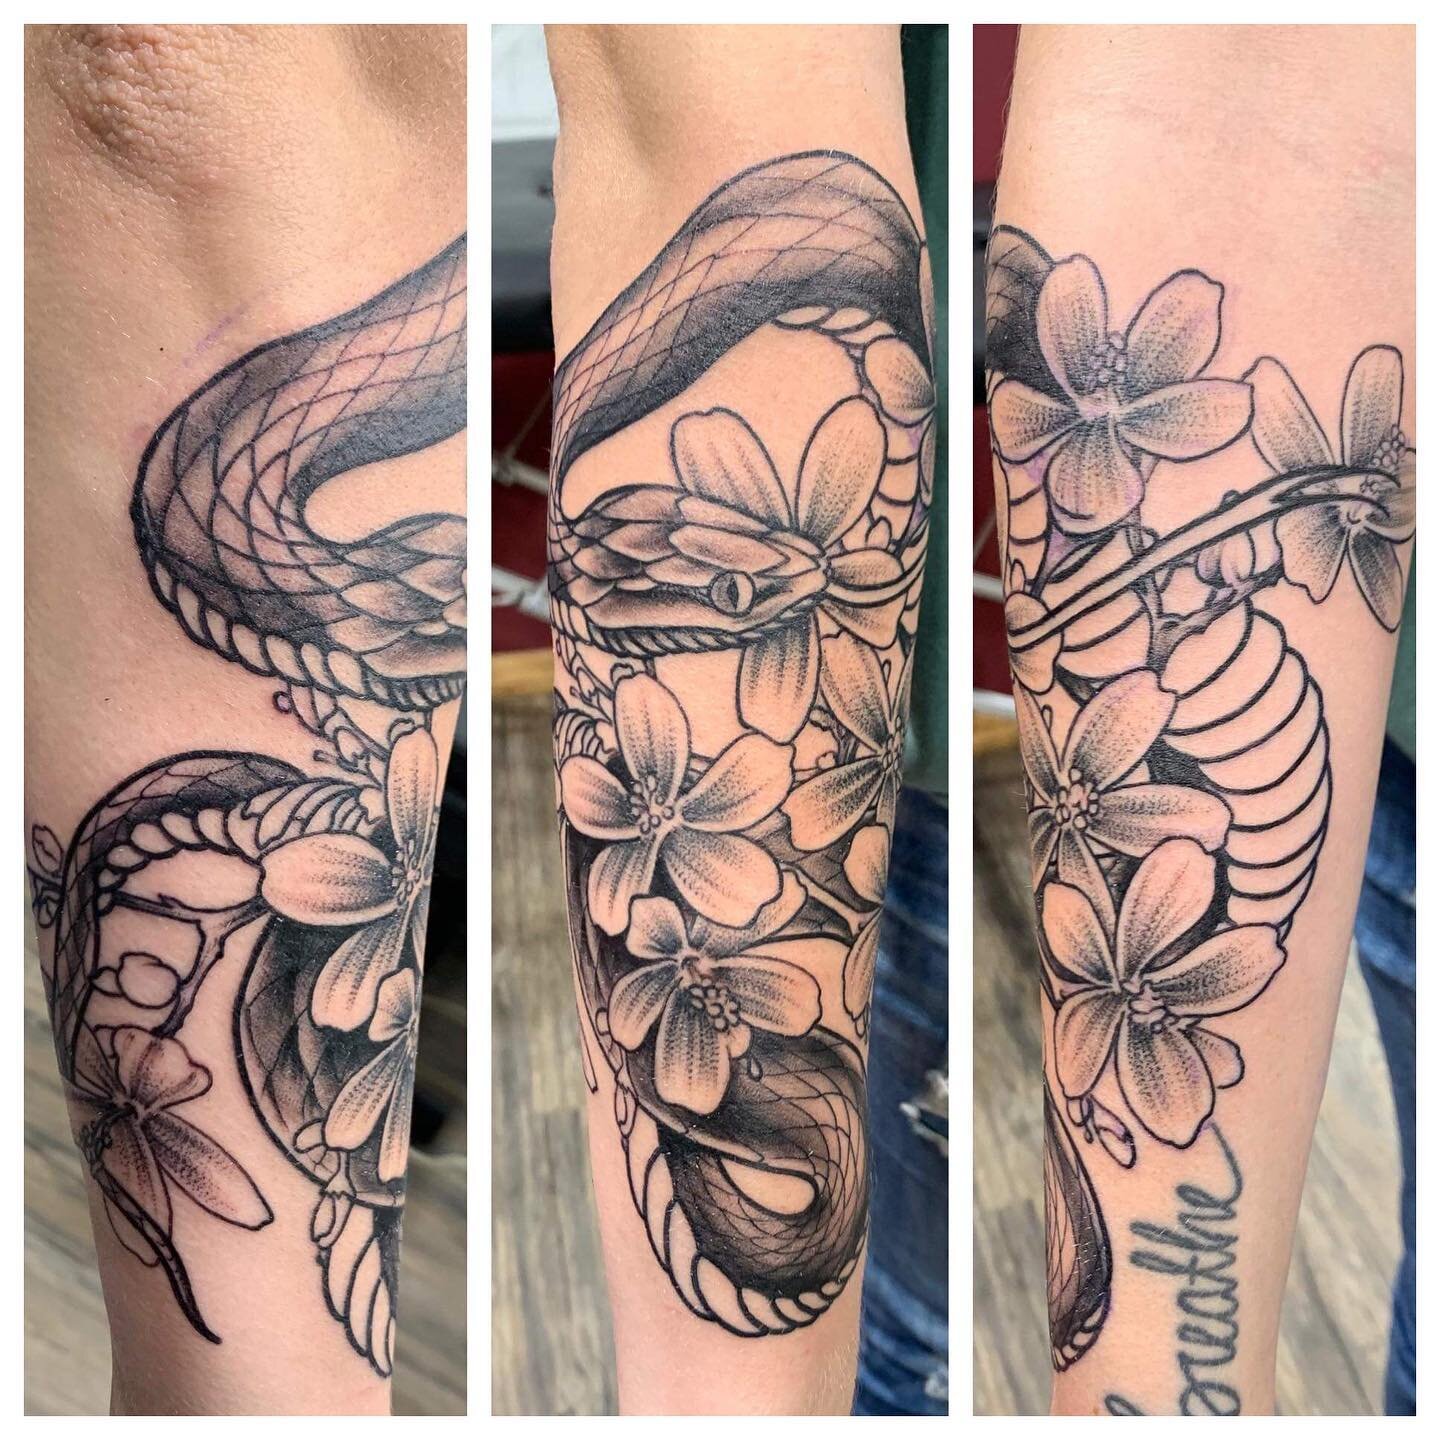 Would love to do more tattoos like this in 2021 at @lightningrevivaltattoo! DM to discuss appointments for the coming year 🌸 
⚡️
Proteam @electrumsupply artist 
⚡️
#tattoos #ink #electrumstencilprimer #tattoosbymattnelson #lightningrevivaltattoocomp